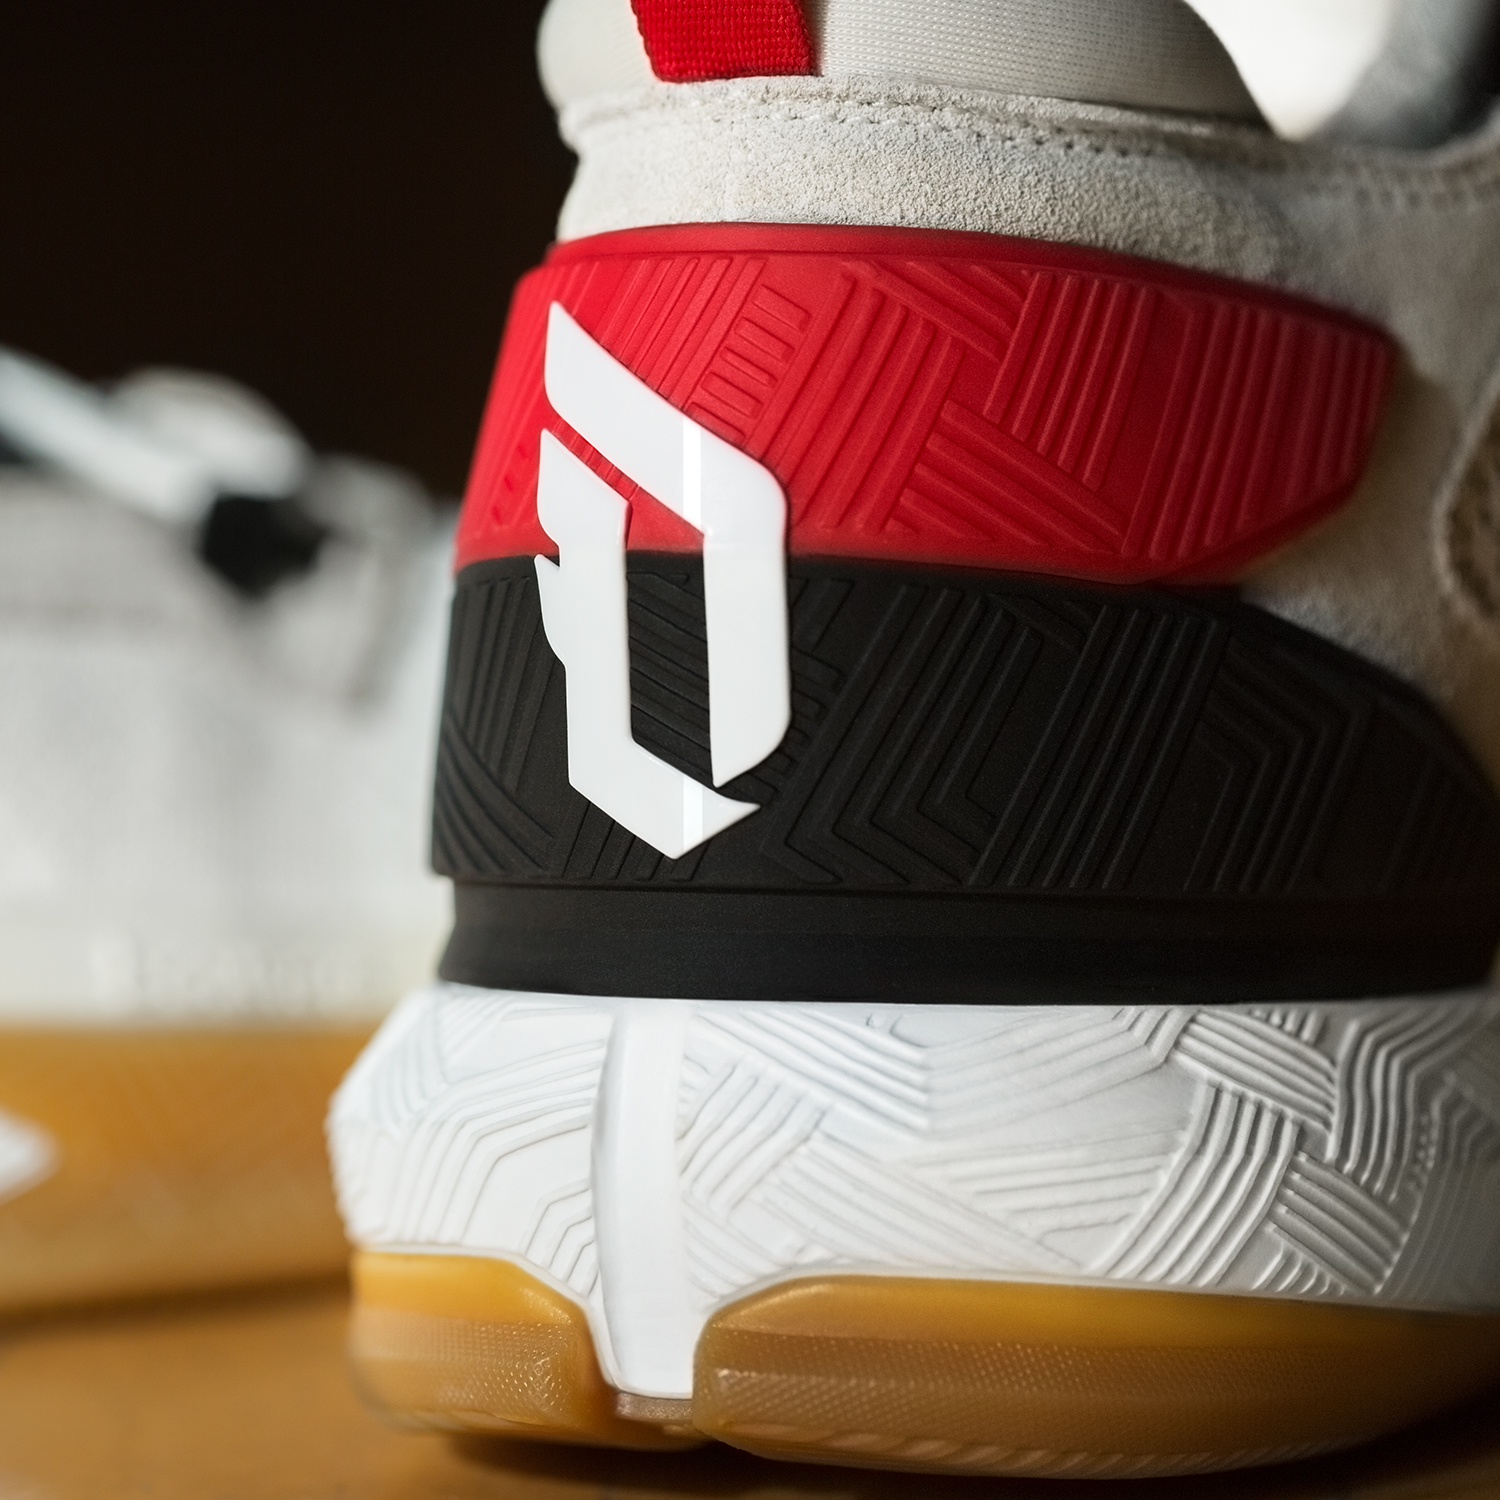 adidas and Damian Lillard officially unveil 